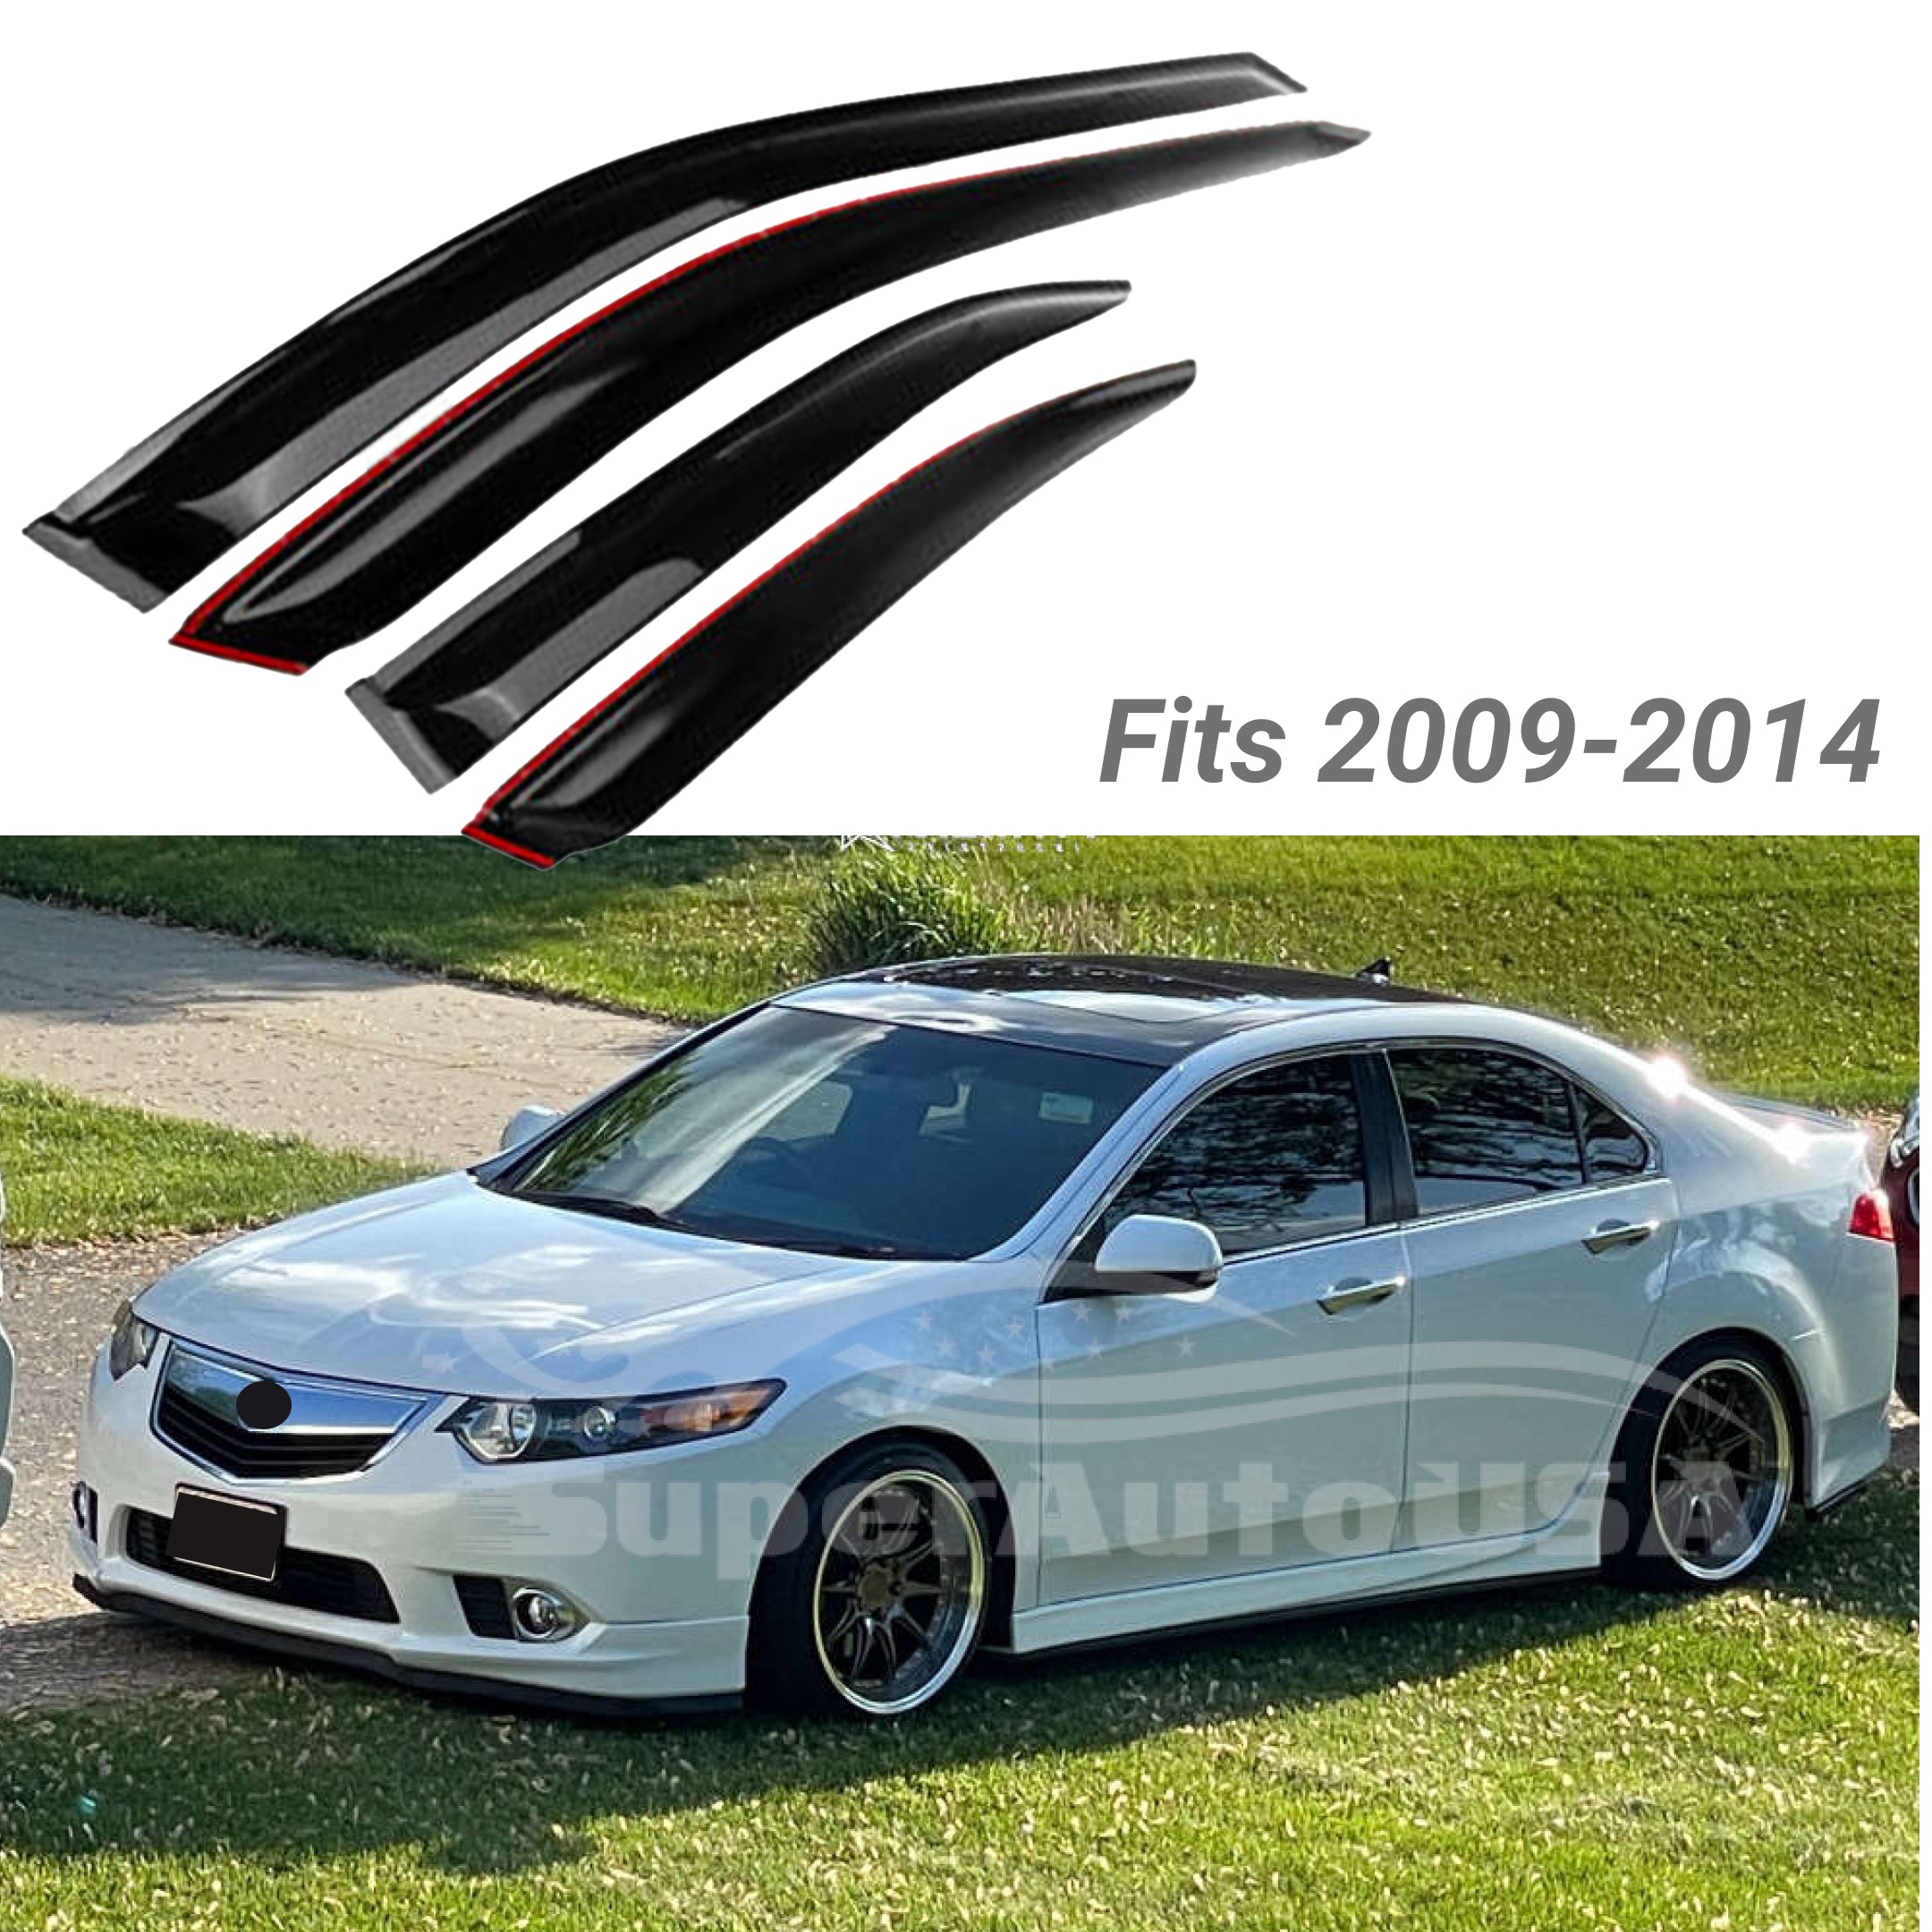 Fit 2009-2014 Acura TSX Out-Channel Vent Window Visors Rain Sun Wind Guards Shade Deflectors - 0